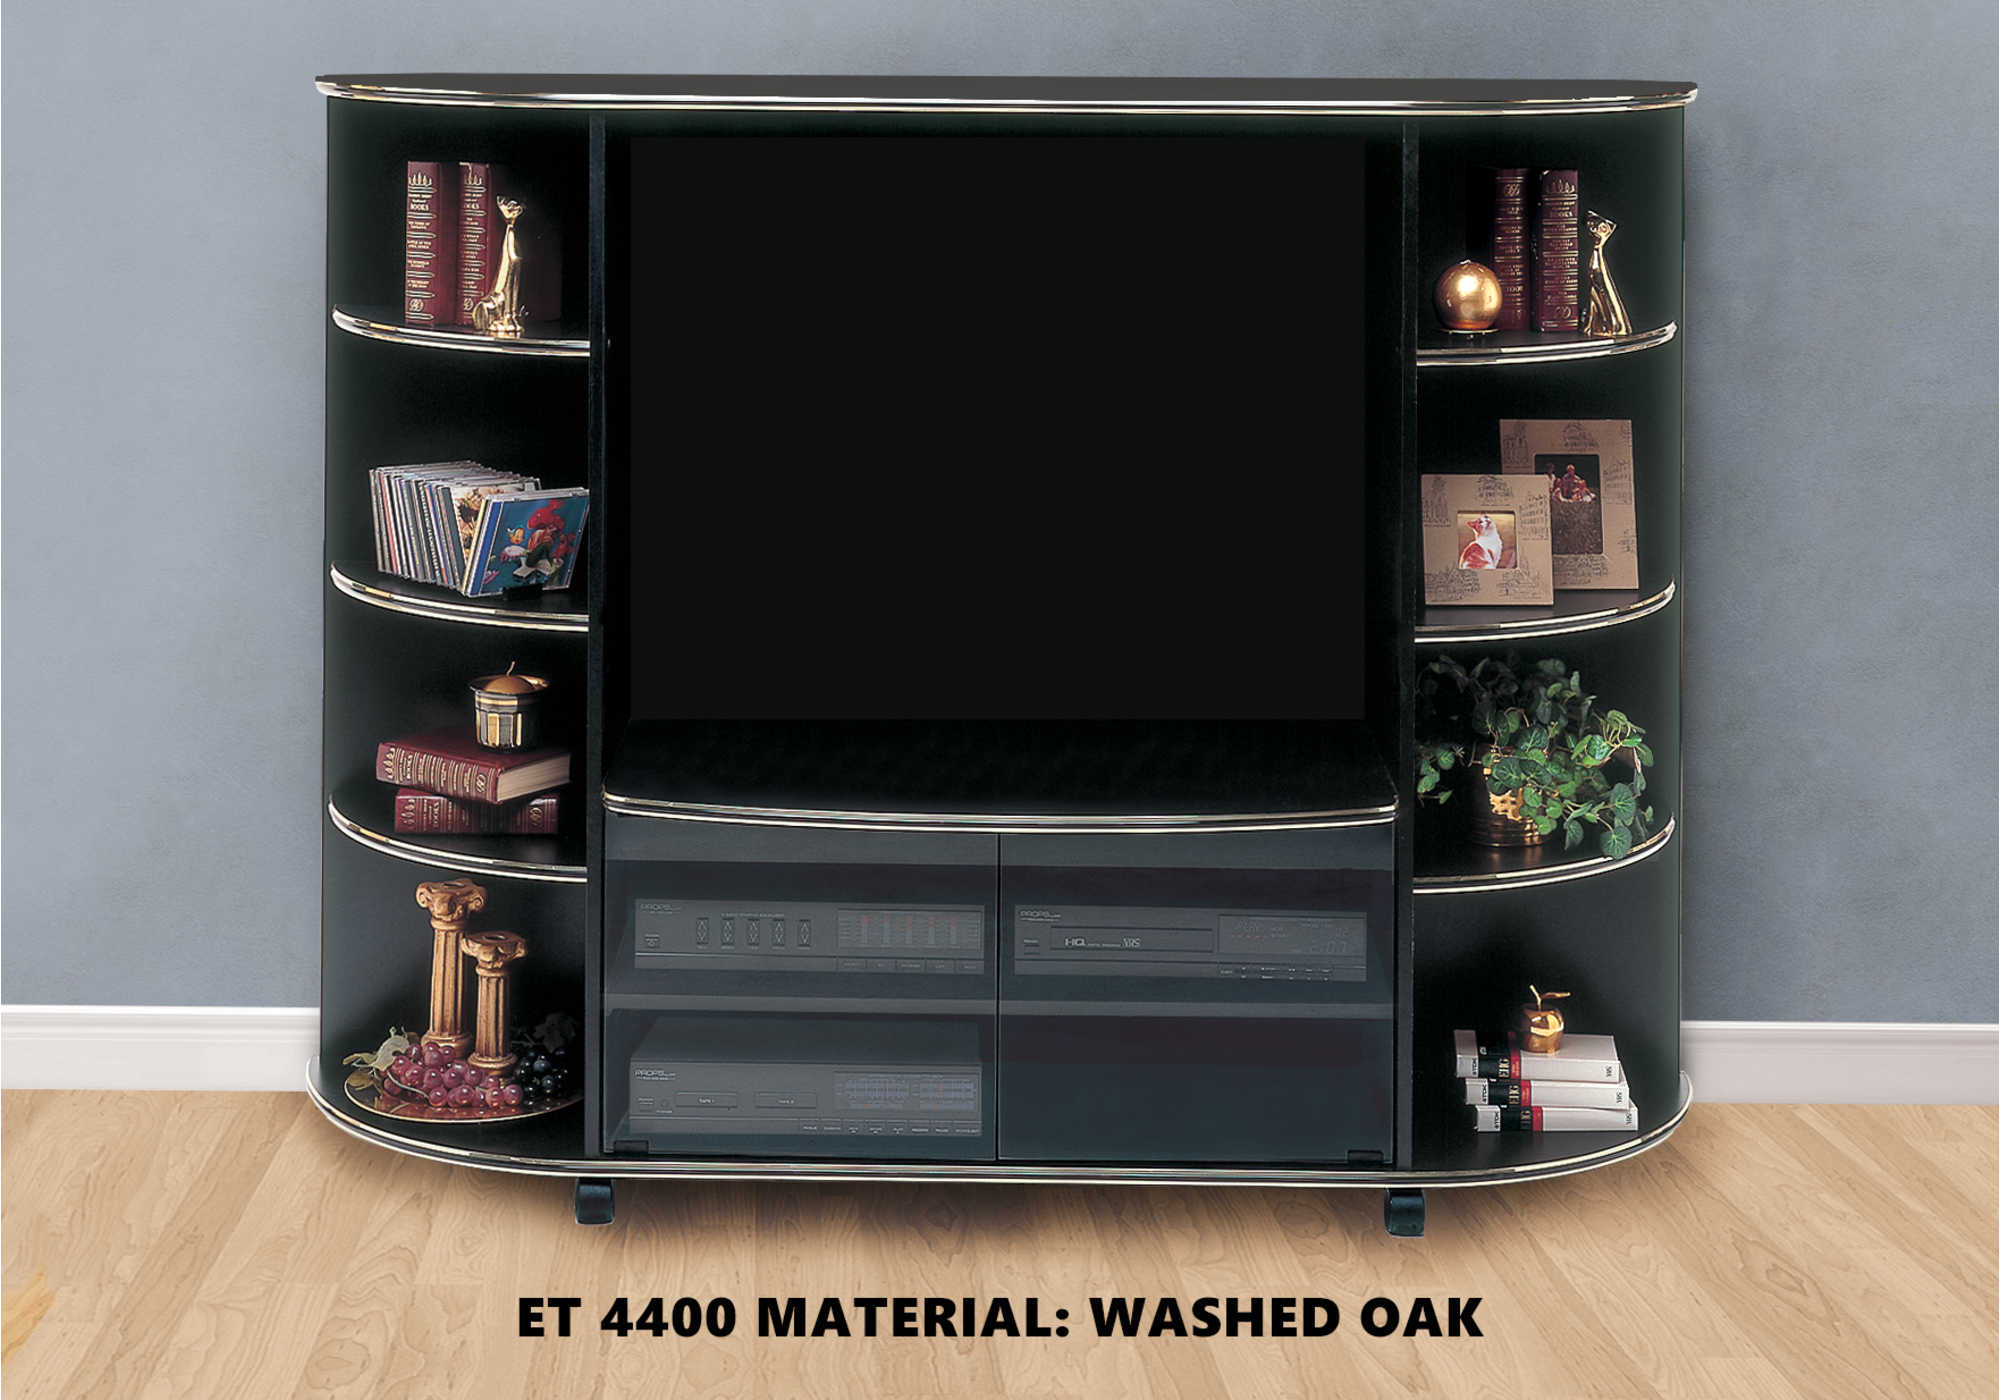 TV STAND - WASHED OAK ENTERTAINMENT CENTER